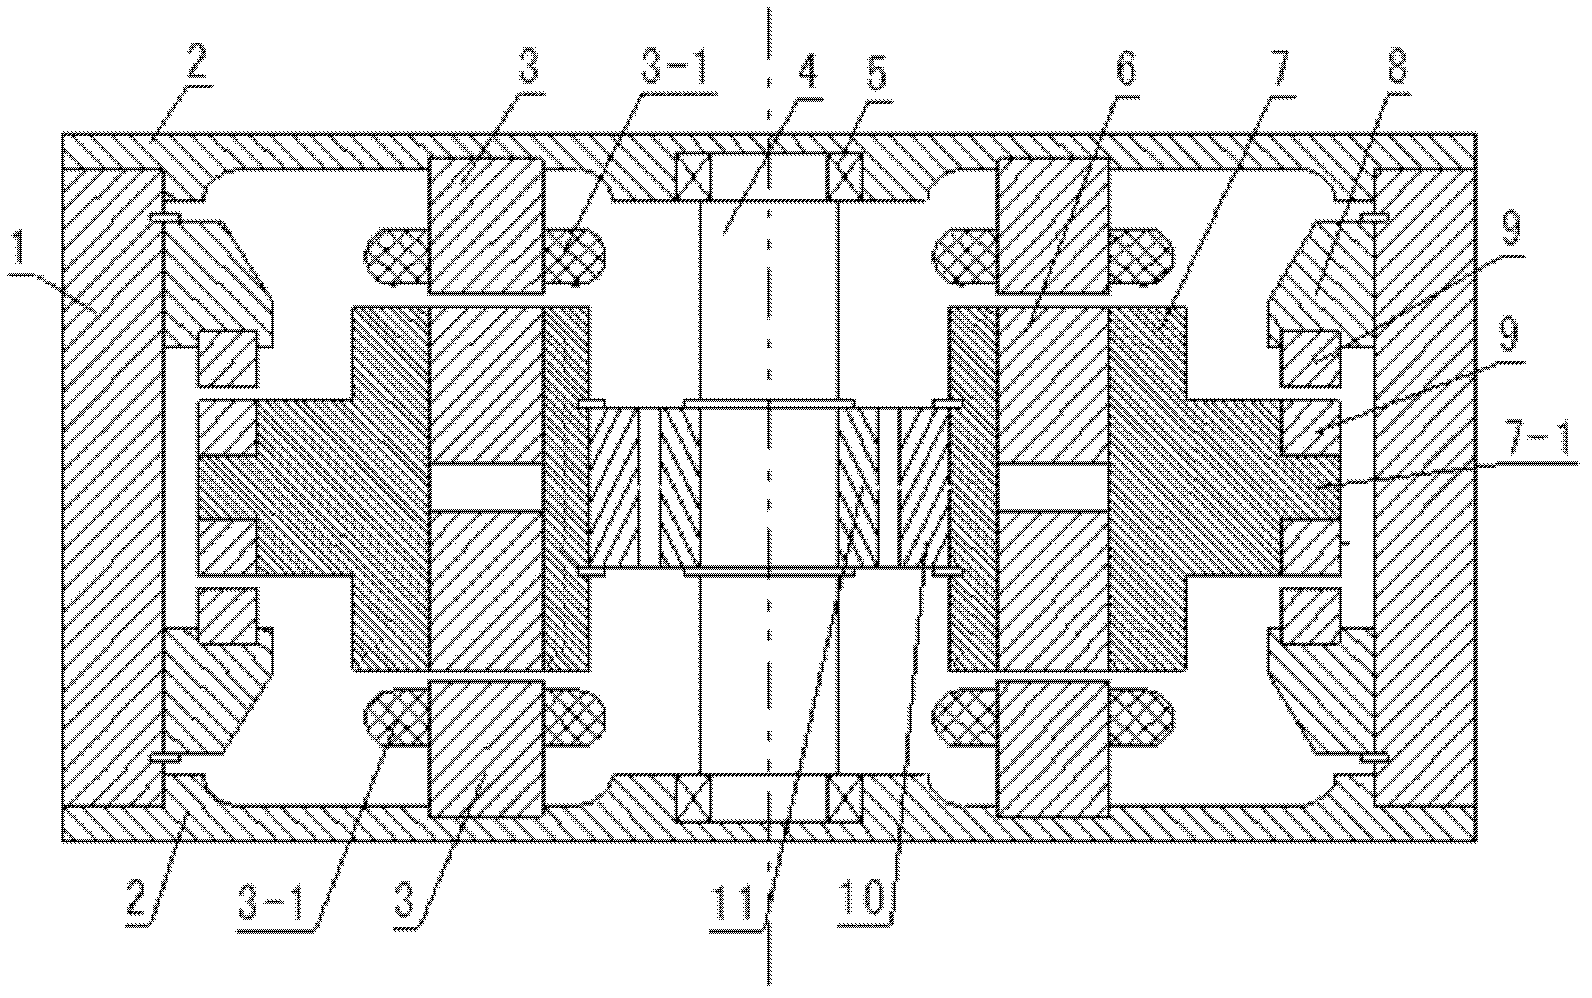 Rotor magnetic levitation structure for double-stator disc motor flywheel energy storage device